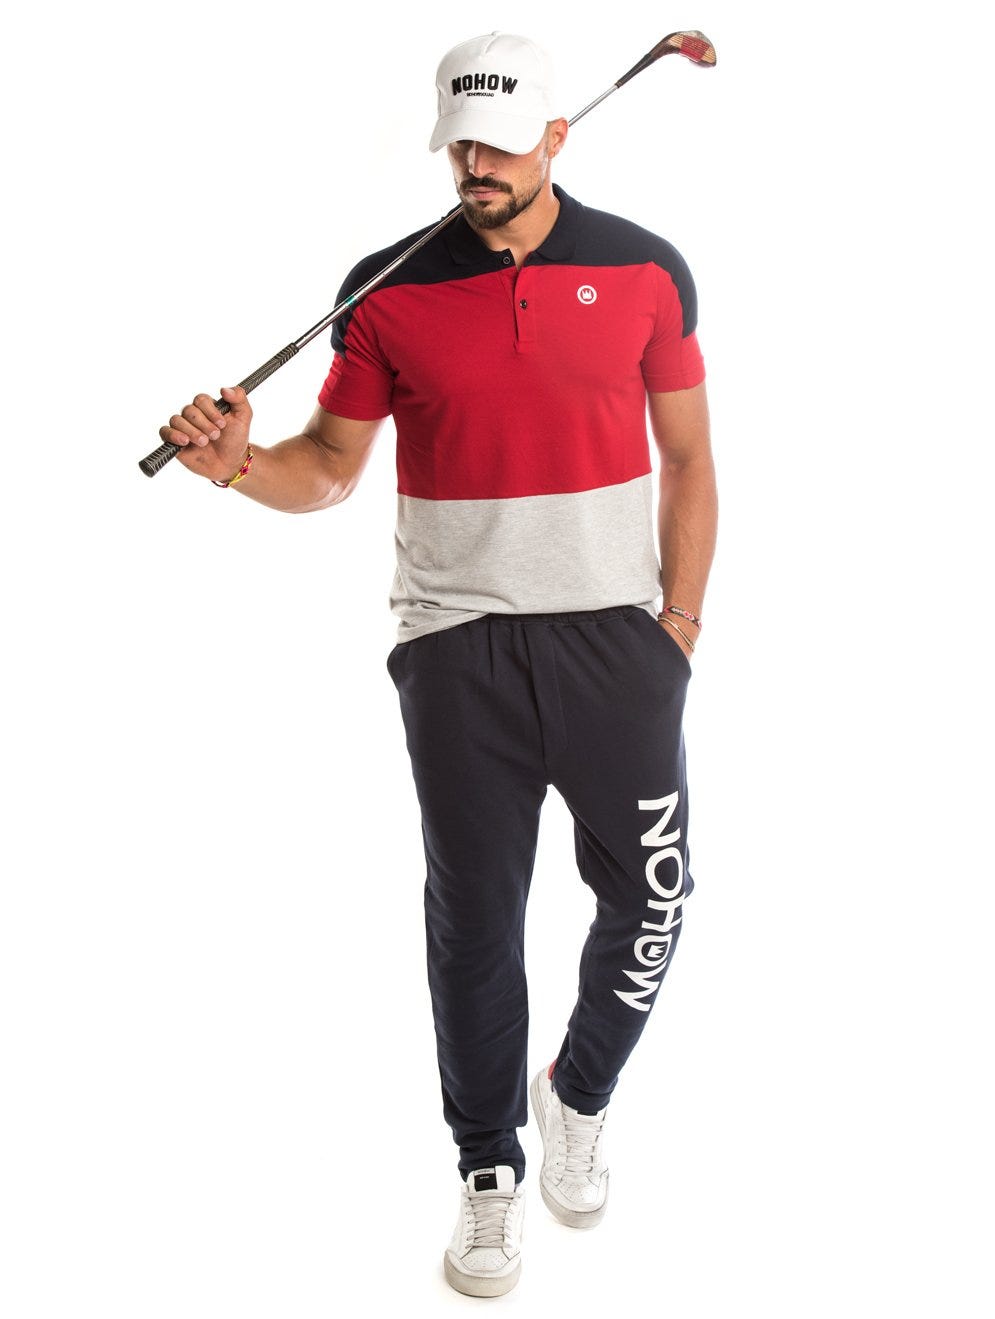 EDWARD COTTON POLO IN BLACK, RED AND GREY